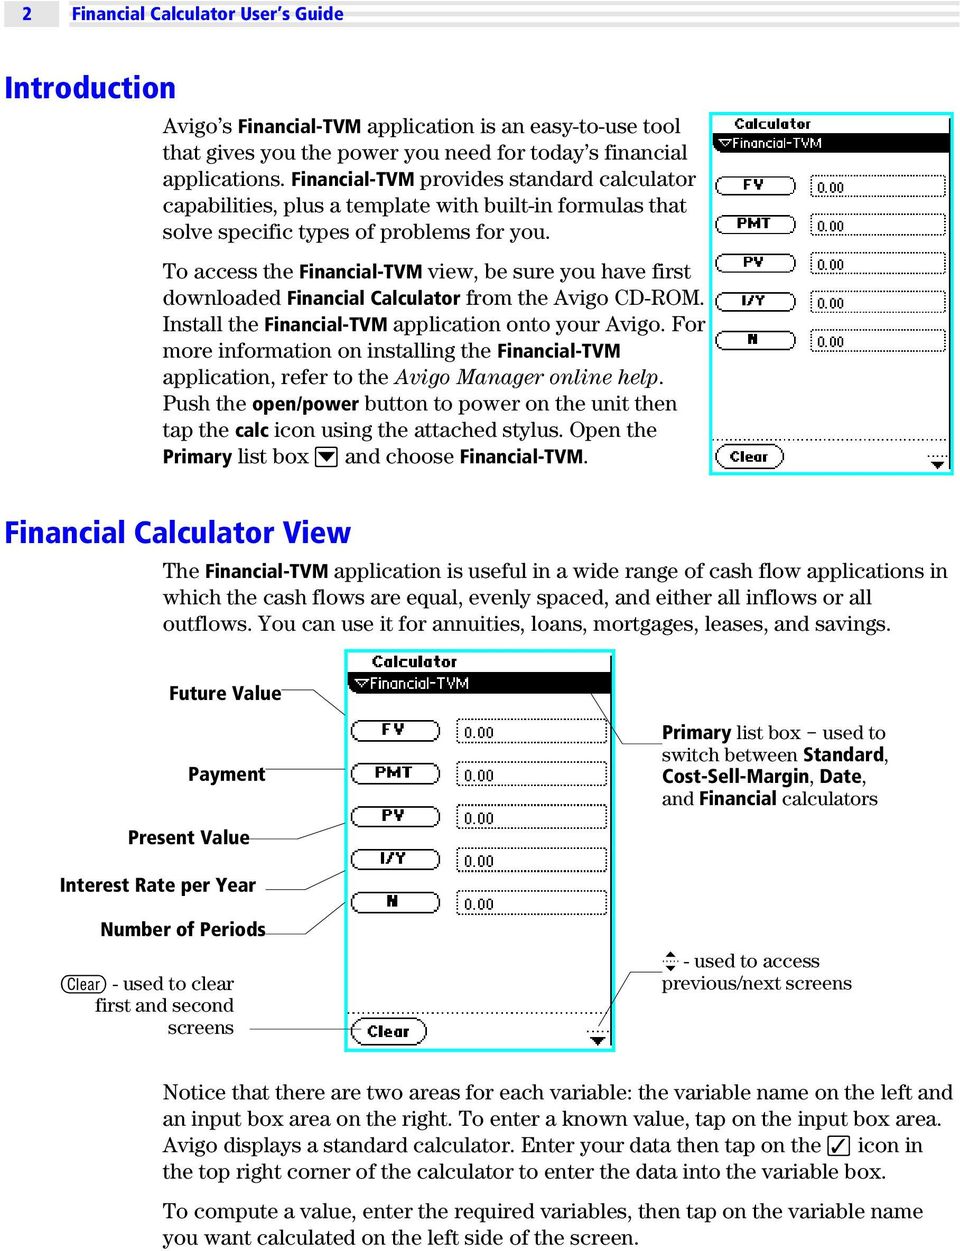 To access the Financial-TVM view, be sure you have first downloaded Financial Calculator from the Avigo CD-ROM. Install the Financial-TVM application onto your Avigo.